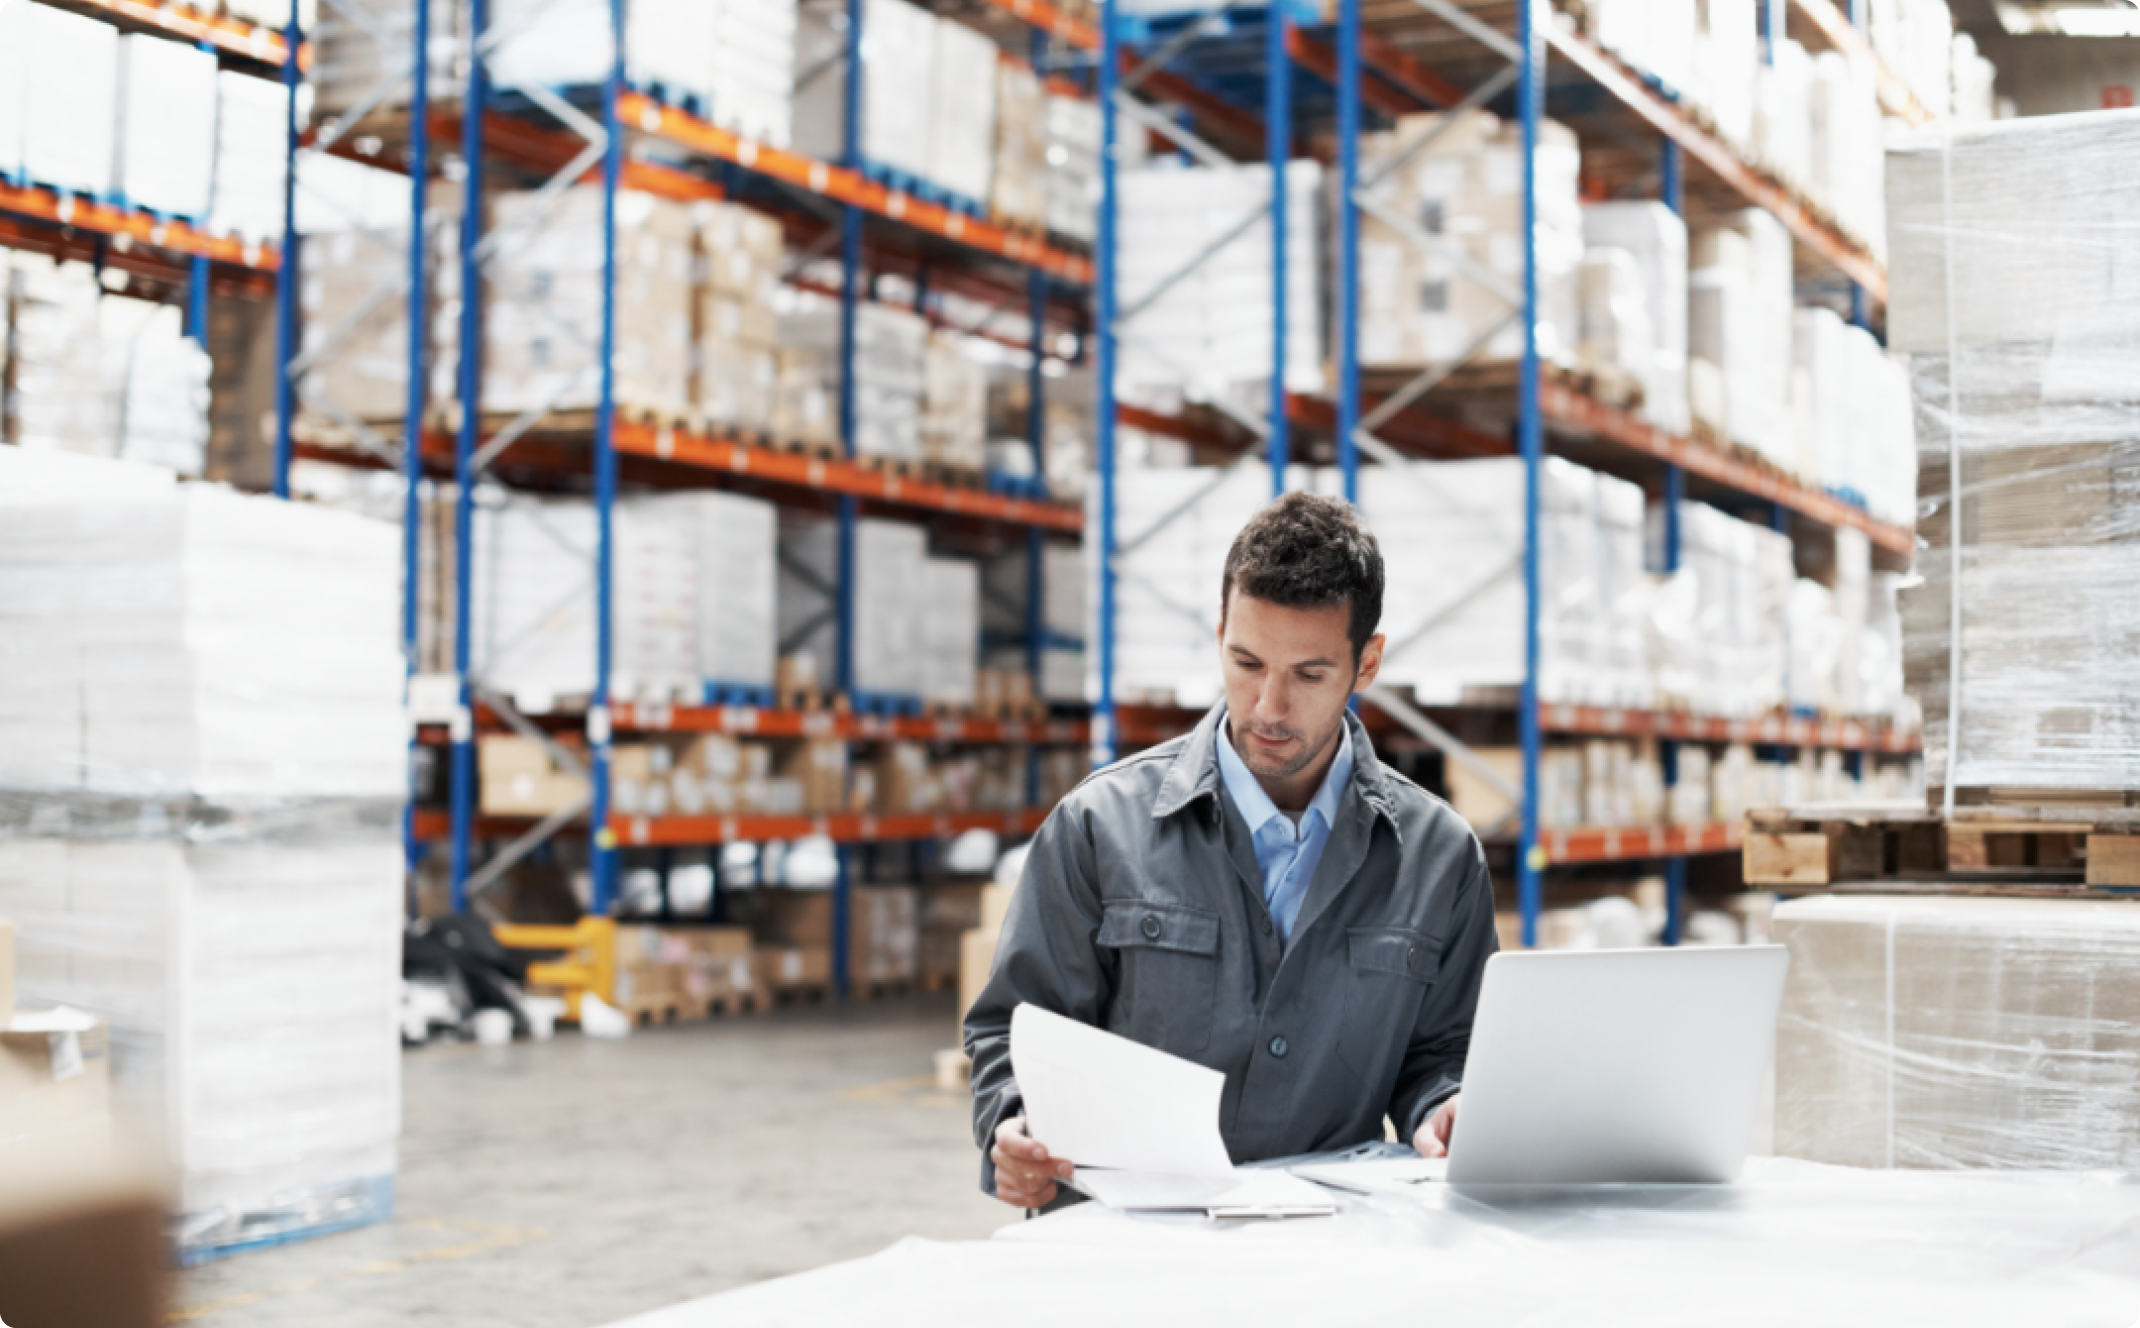 Male looking at a paper and working on a laptop in a warehouse